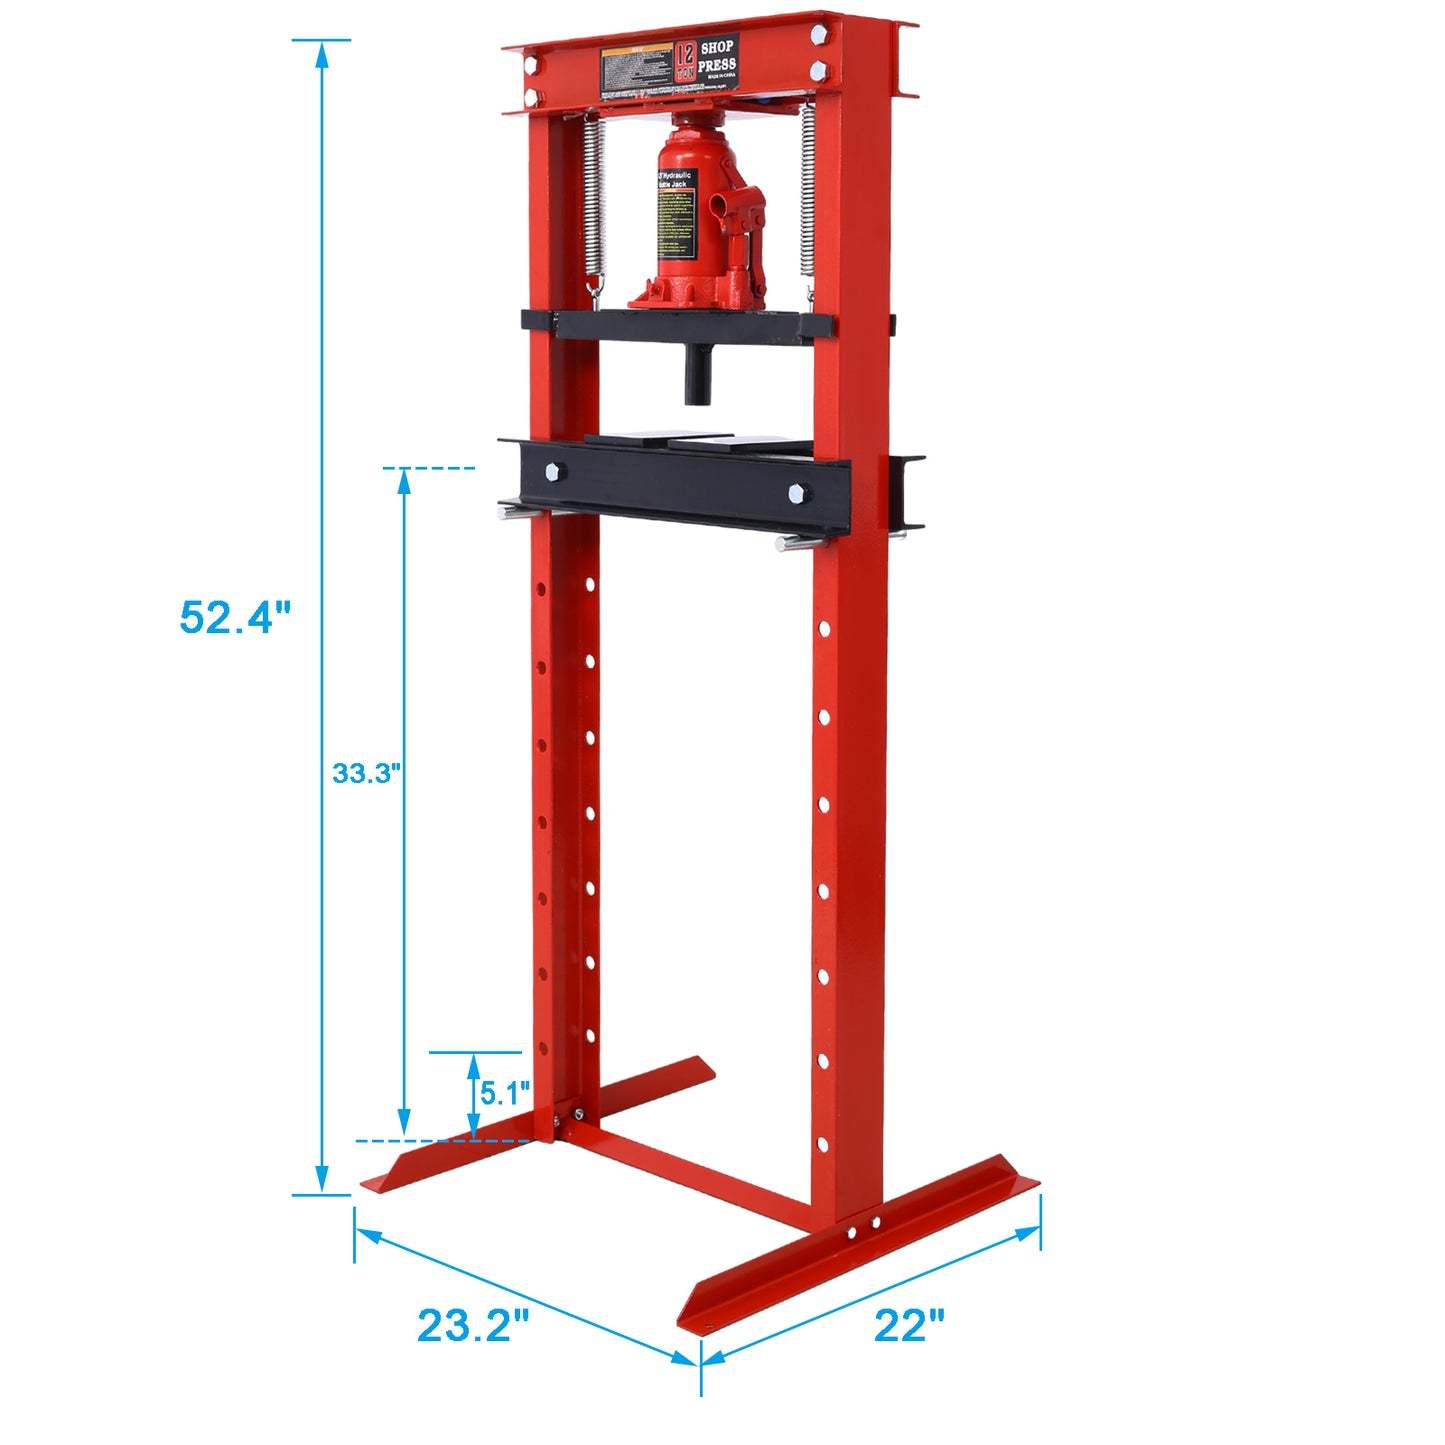 Hydraulic Shop Press ,12-Ton Capacity , Floor Mount ,with Press Plates, H-Frame Garage Floor Press, Adjustable Working Table Height,red